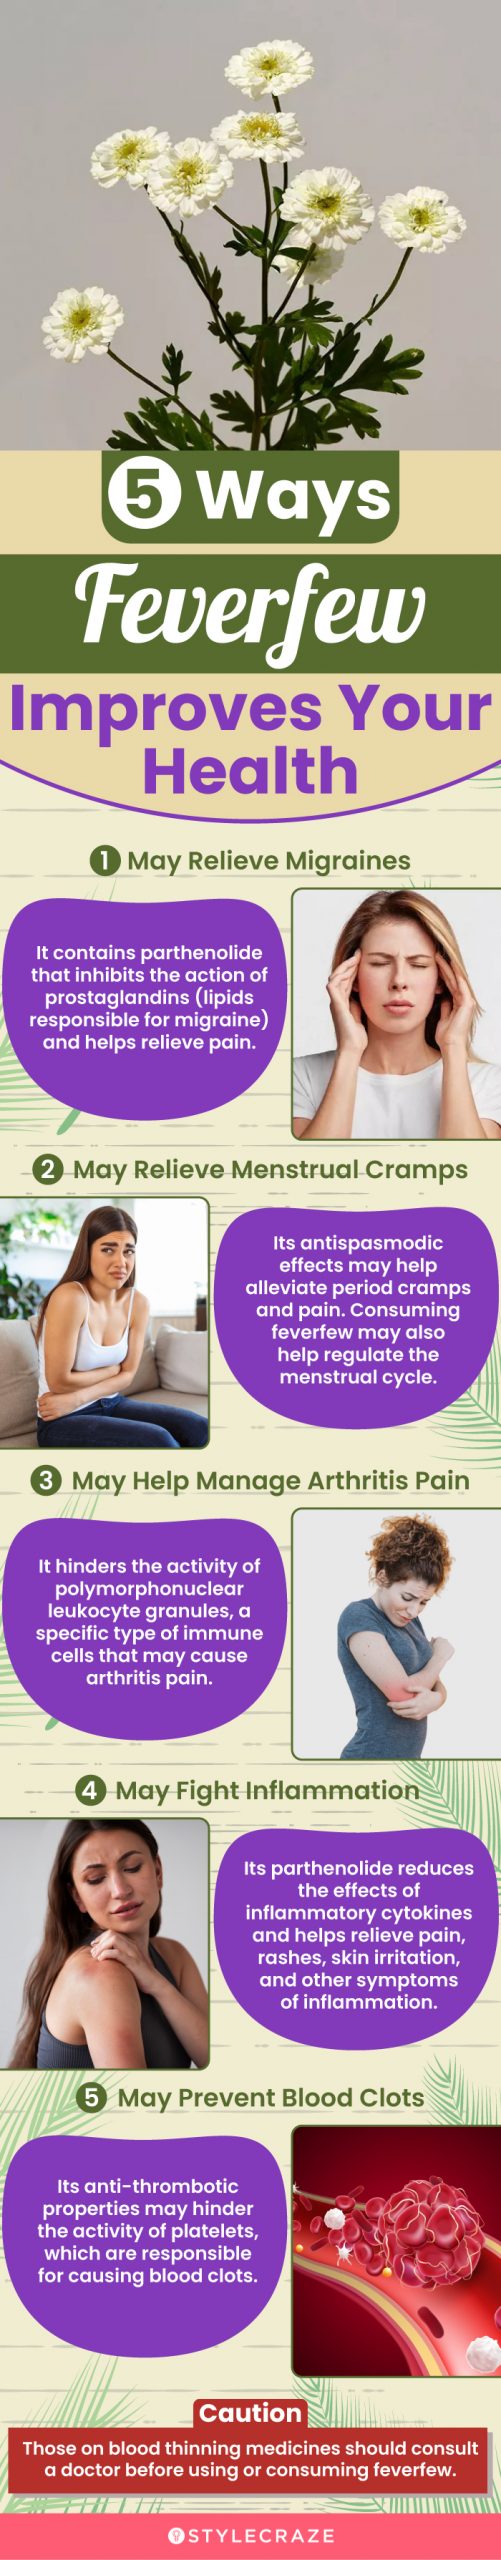 5 ways feverfew improves your health (infographic)